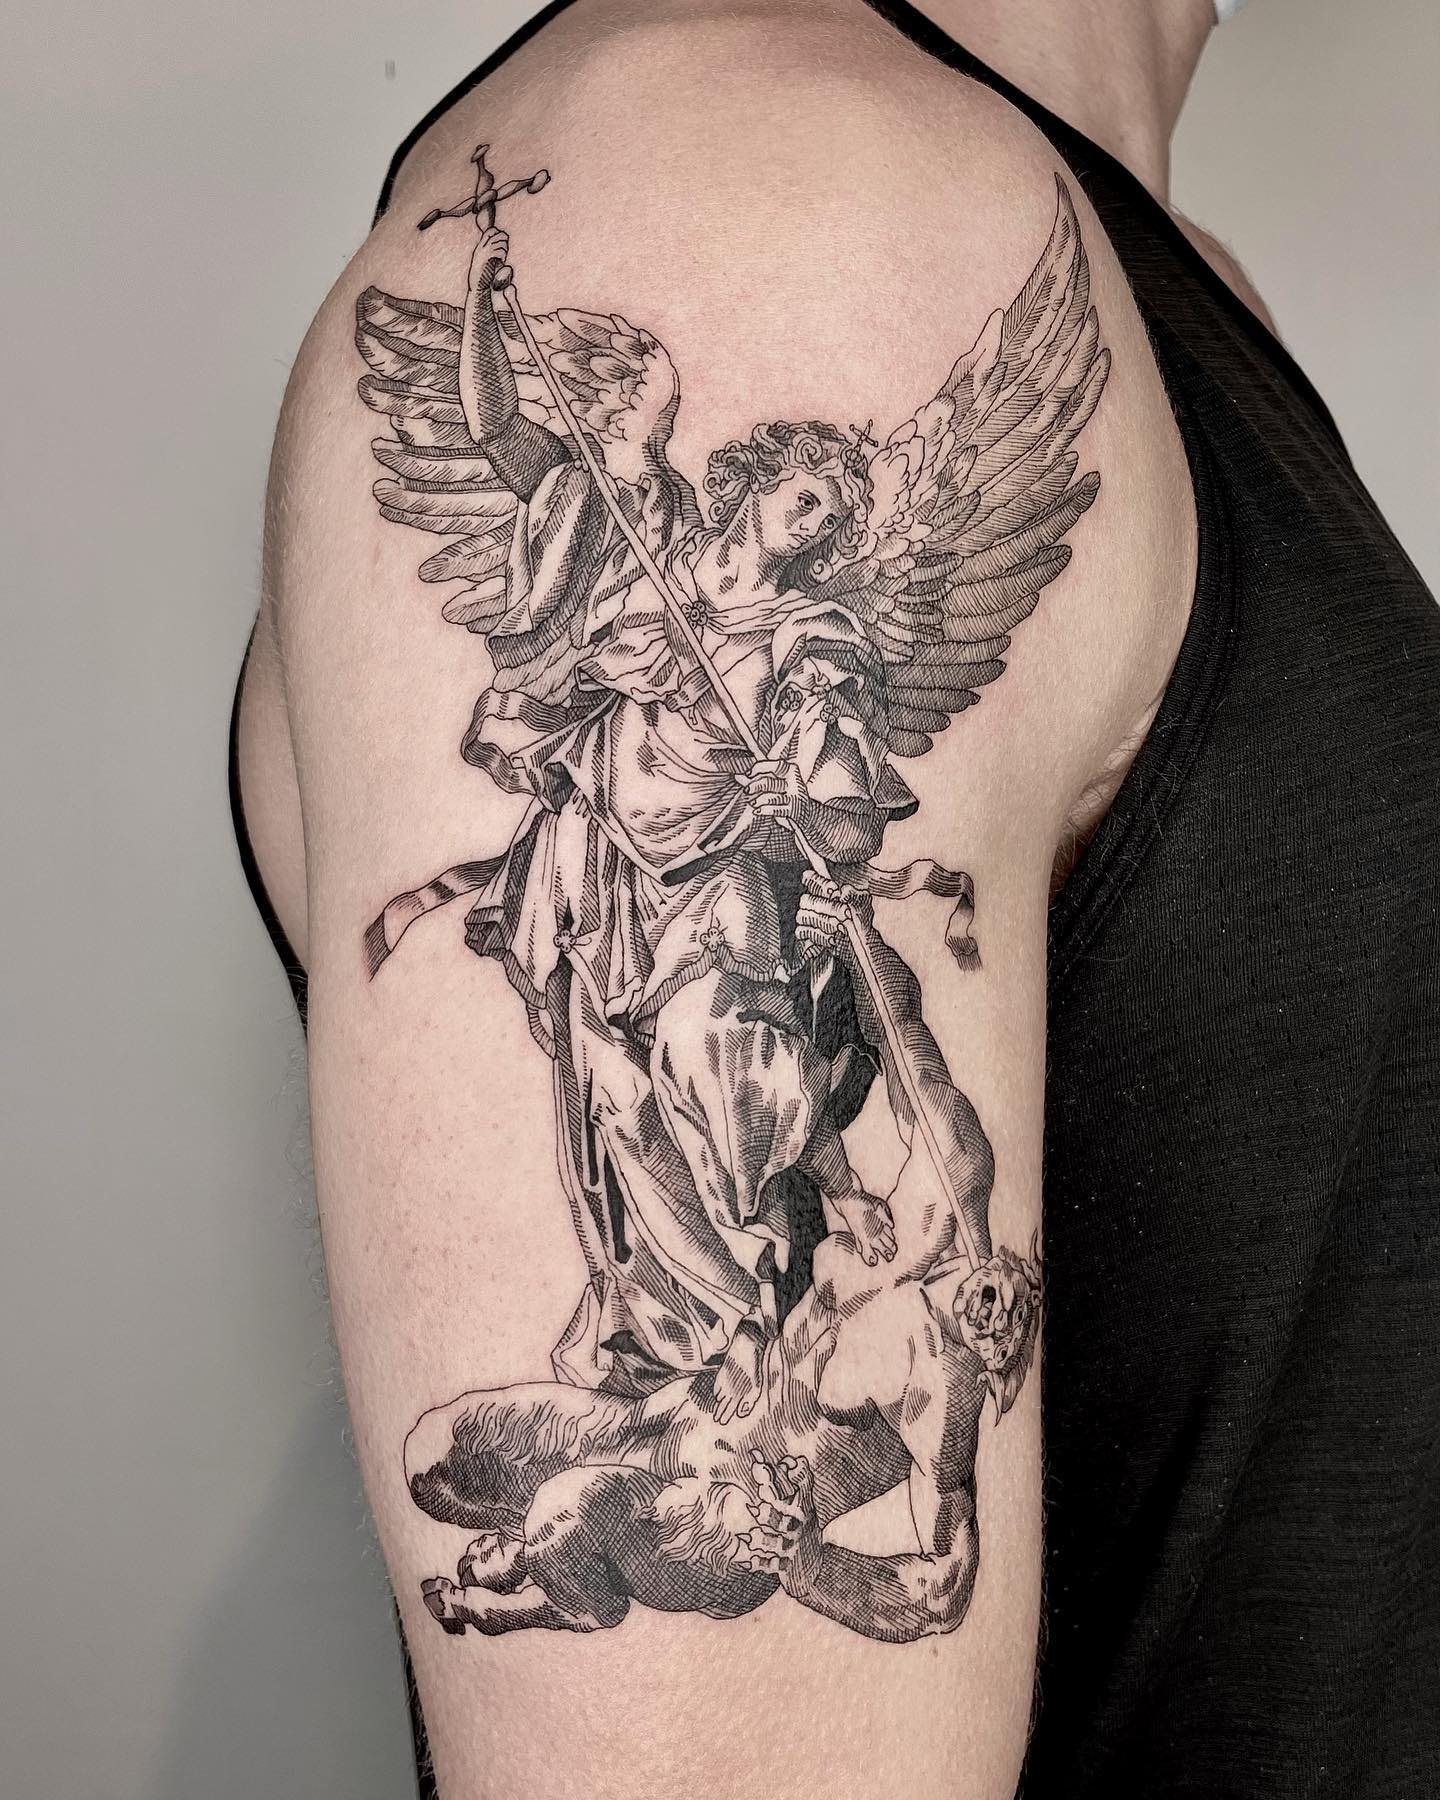 If you are a firm believer when it comes to spiritual signs or Greek mythology, why not book this black ink shoulder tattoo design?